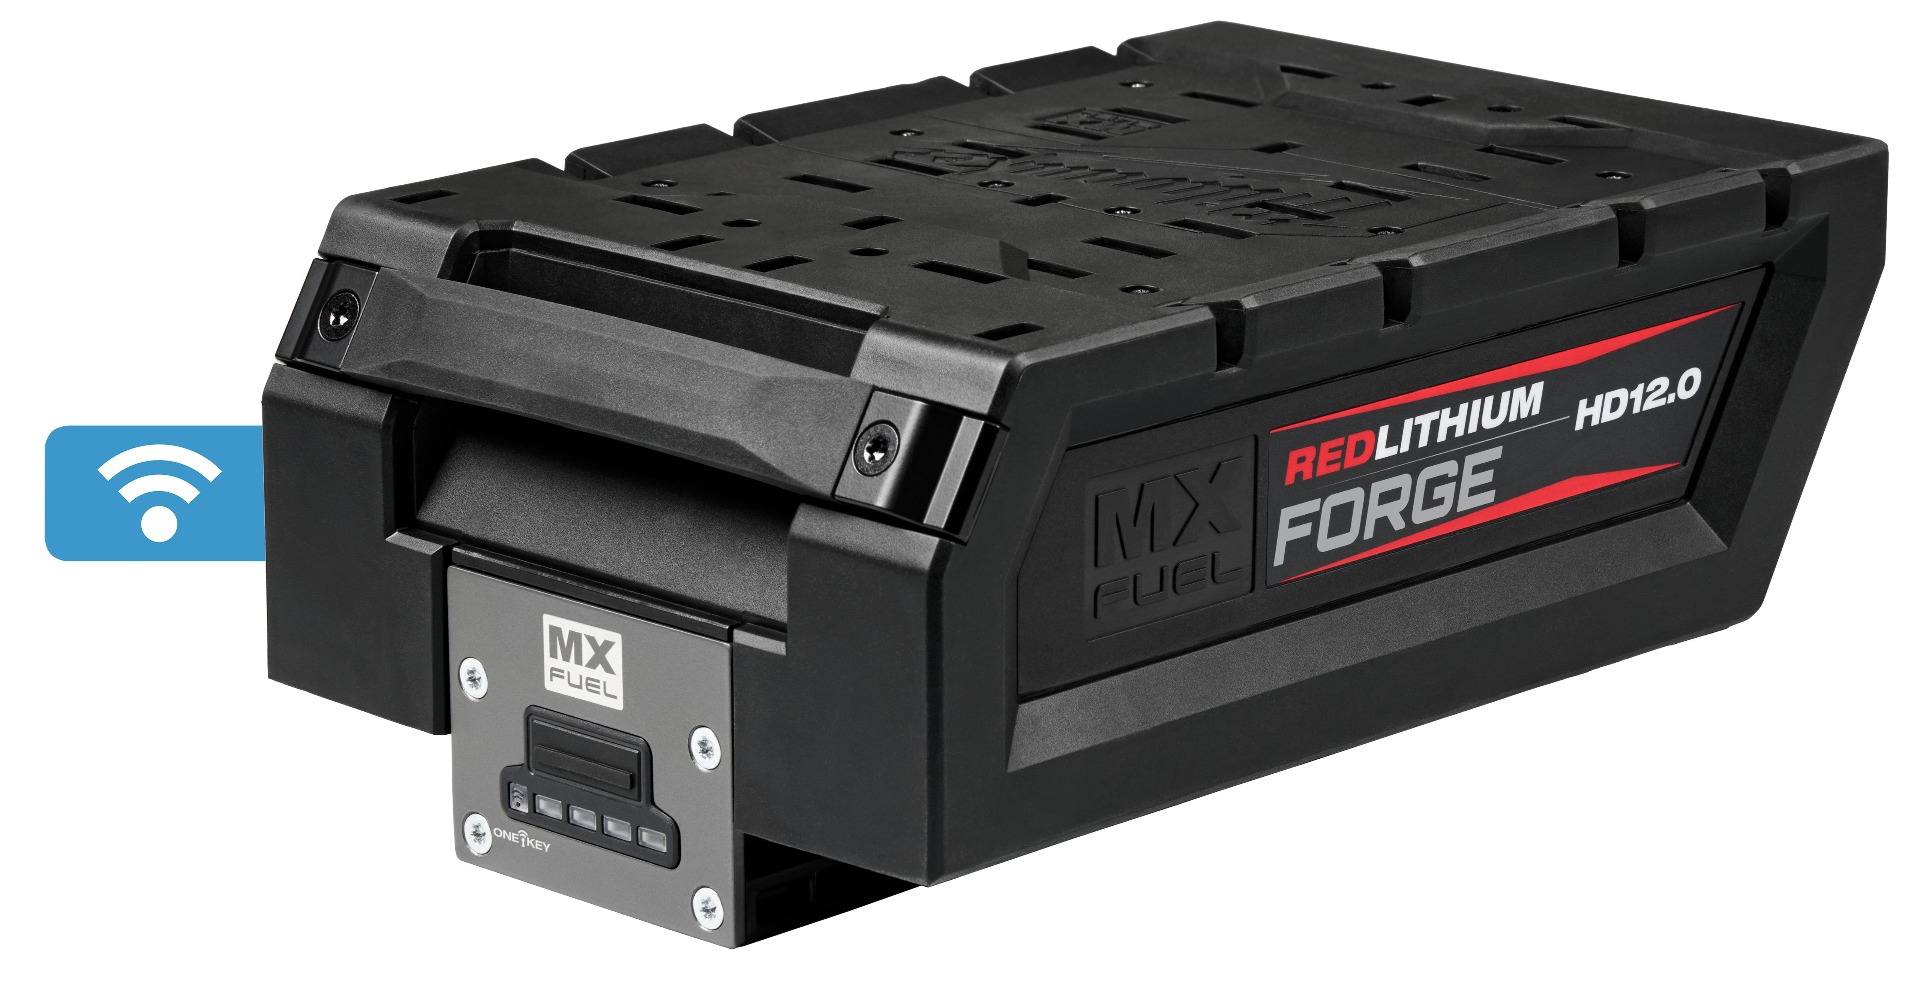 MX FUEL™  REDLITHIUM™ FORGE™ HD12.0 BATTERY PACK